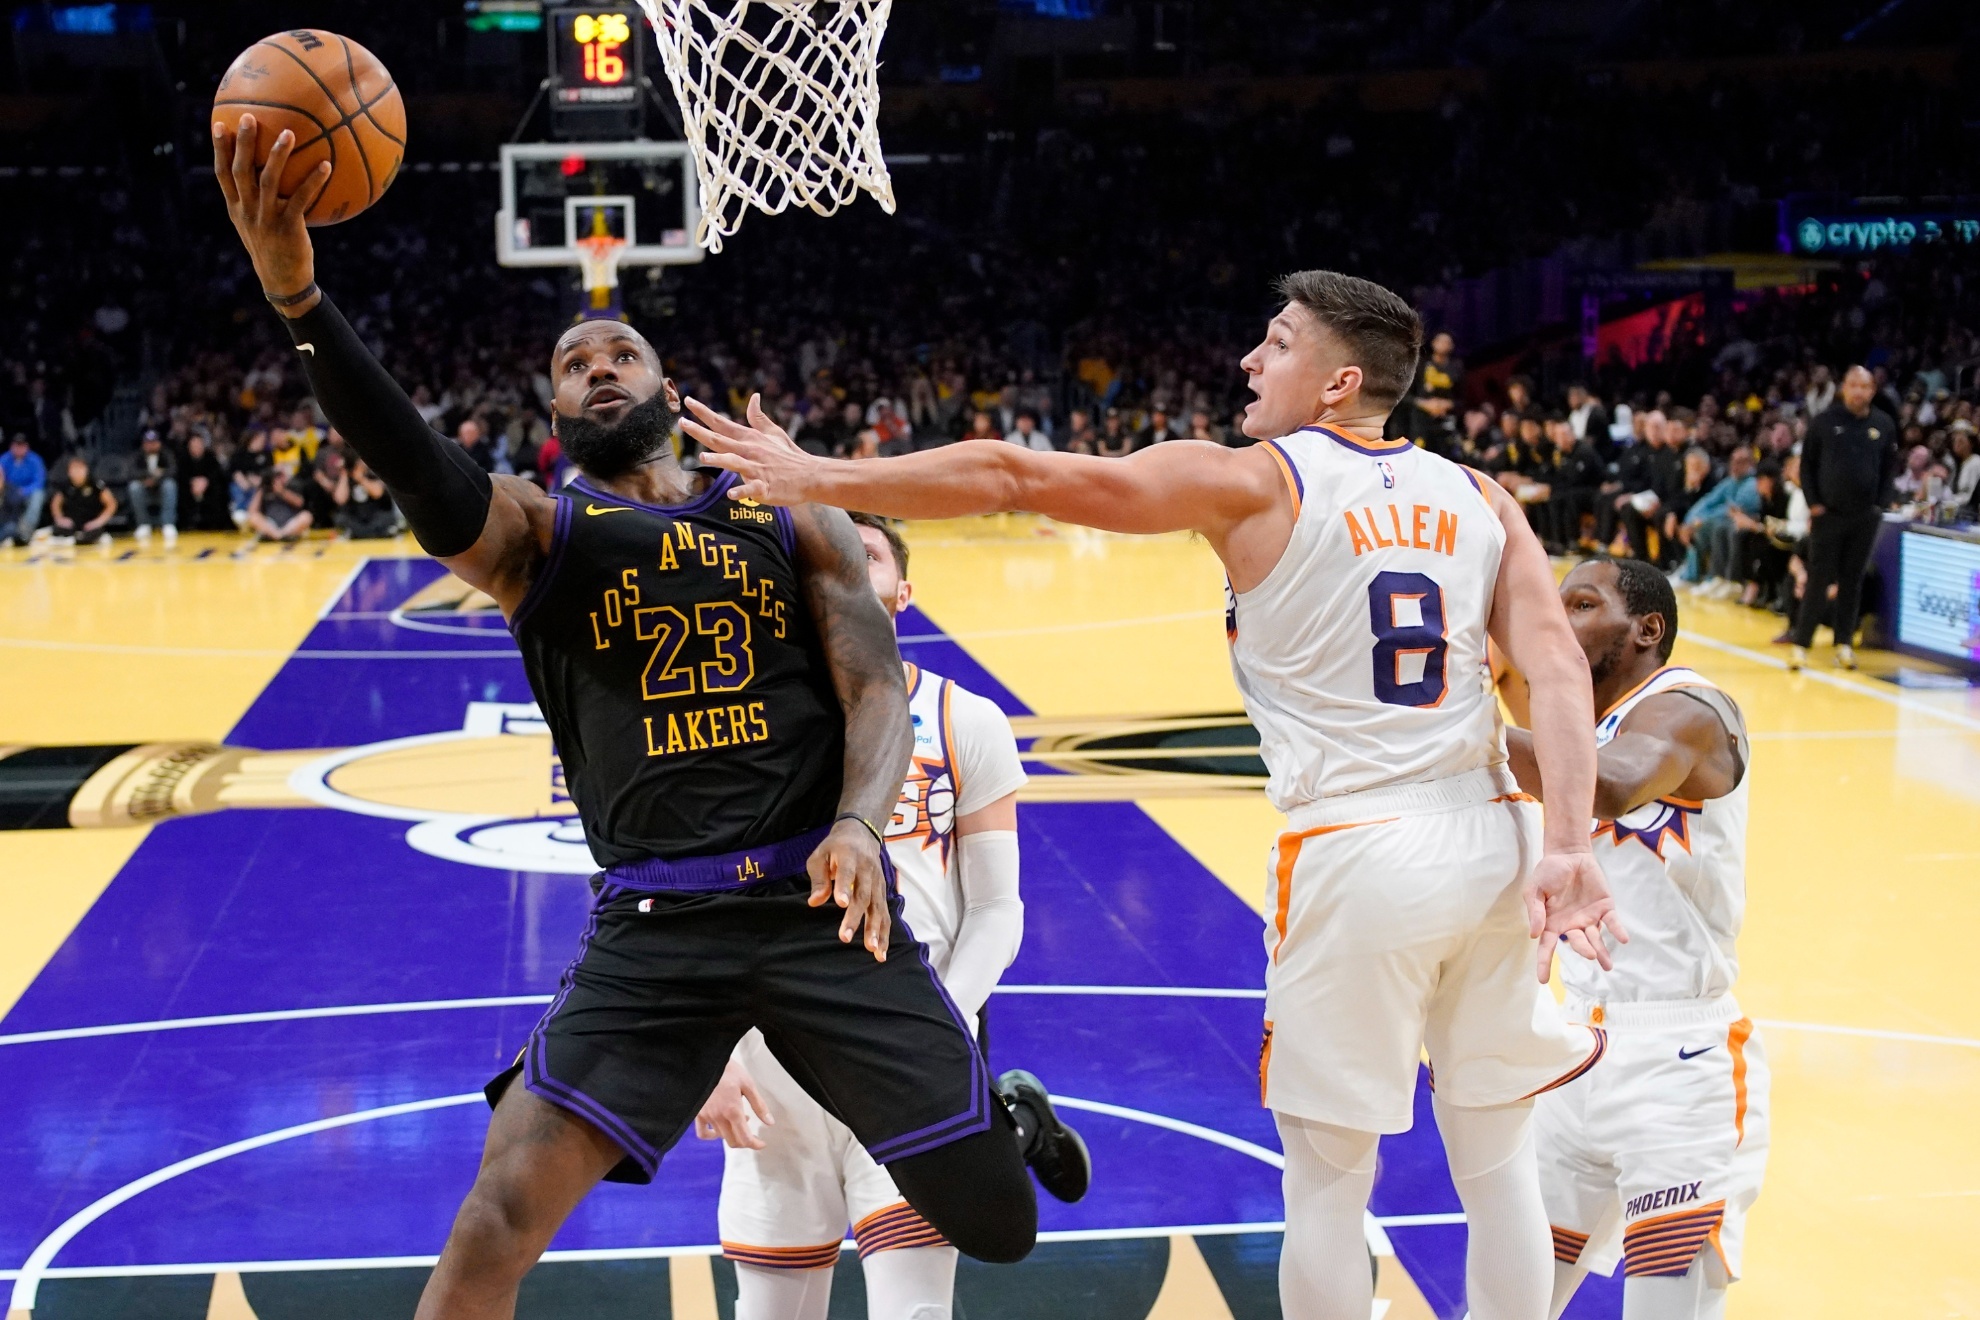 Los Angeles Lakers forward LeBron James and Phoenix Suns guard Grayson Allen during the quarterfinal game.